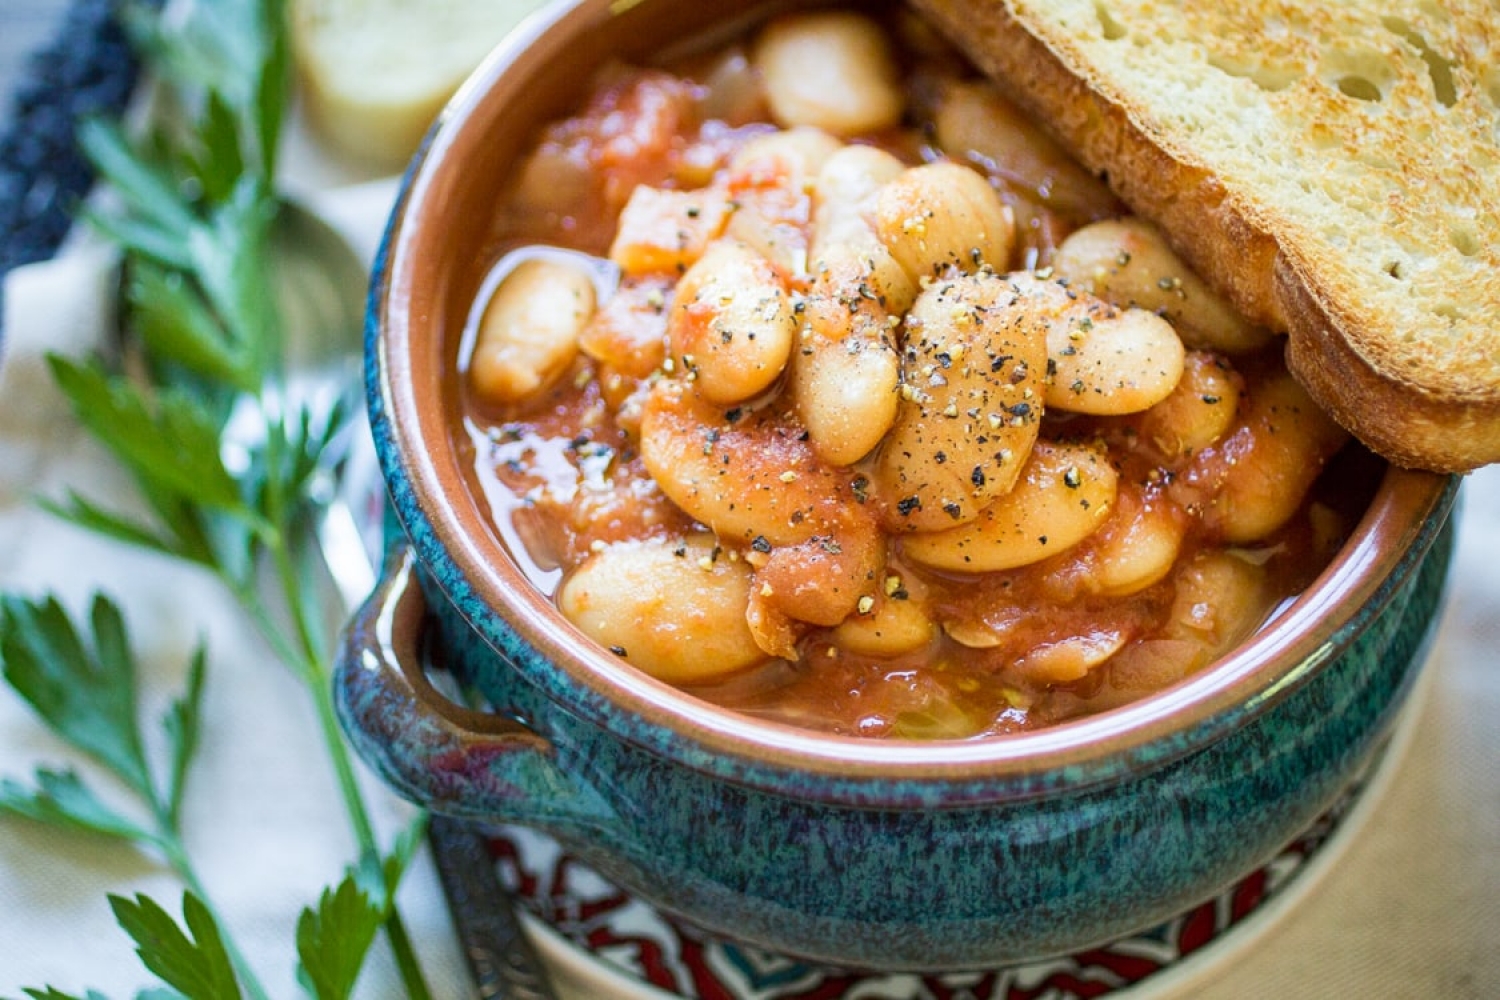 <p>For a taste of Greece on your plate, try <a href="https://thewanderlustkitchen.com/greek-gigantes/" rel="noopener">this no-fuss slow cooker recipe</a> made with Greek gigantes (giant beans) in a flavorful tomato sauce. If you can't find that bean variety, butter beans or lima beans can easily be swapped in. But they do have a unique flavor you'll love.</p>